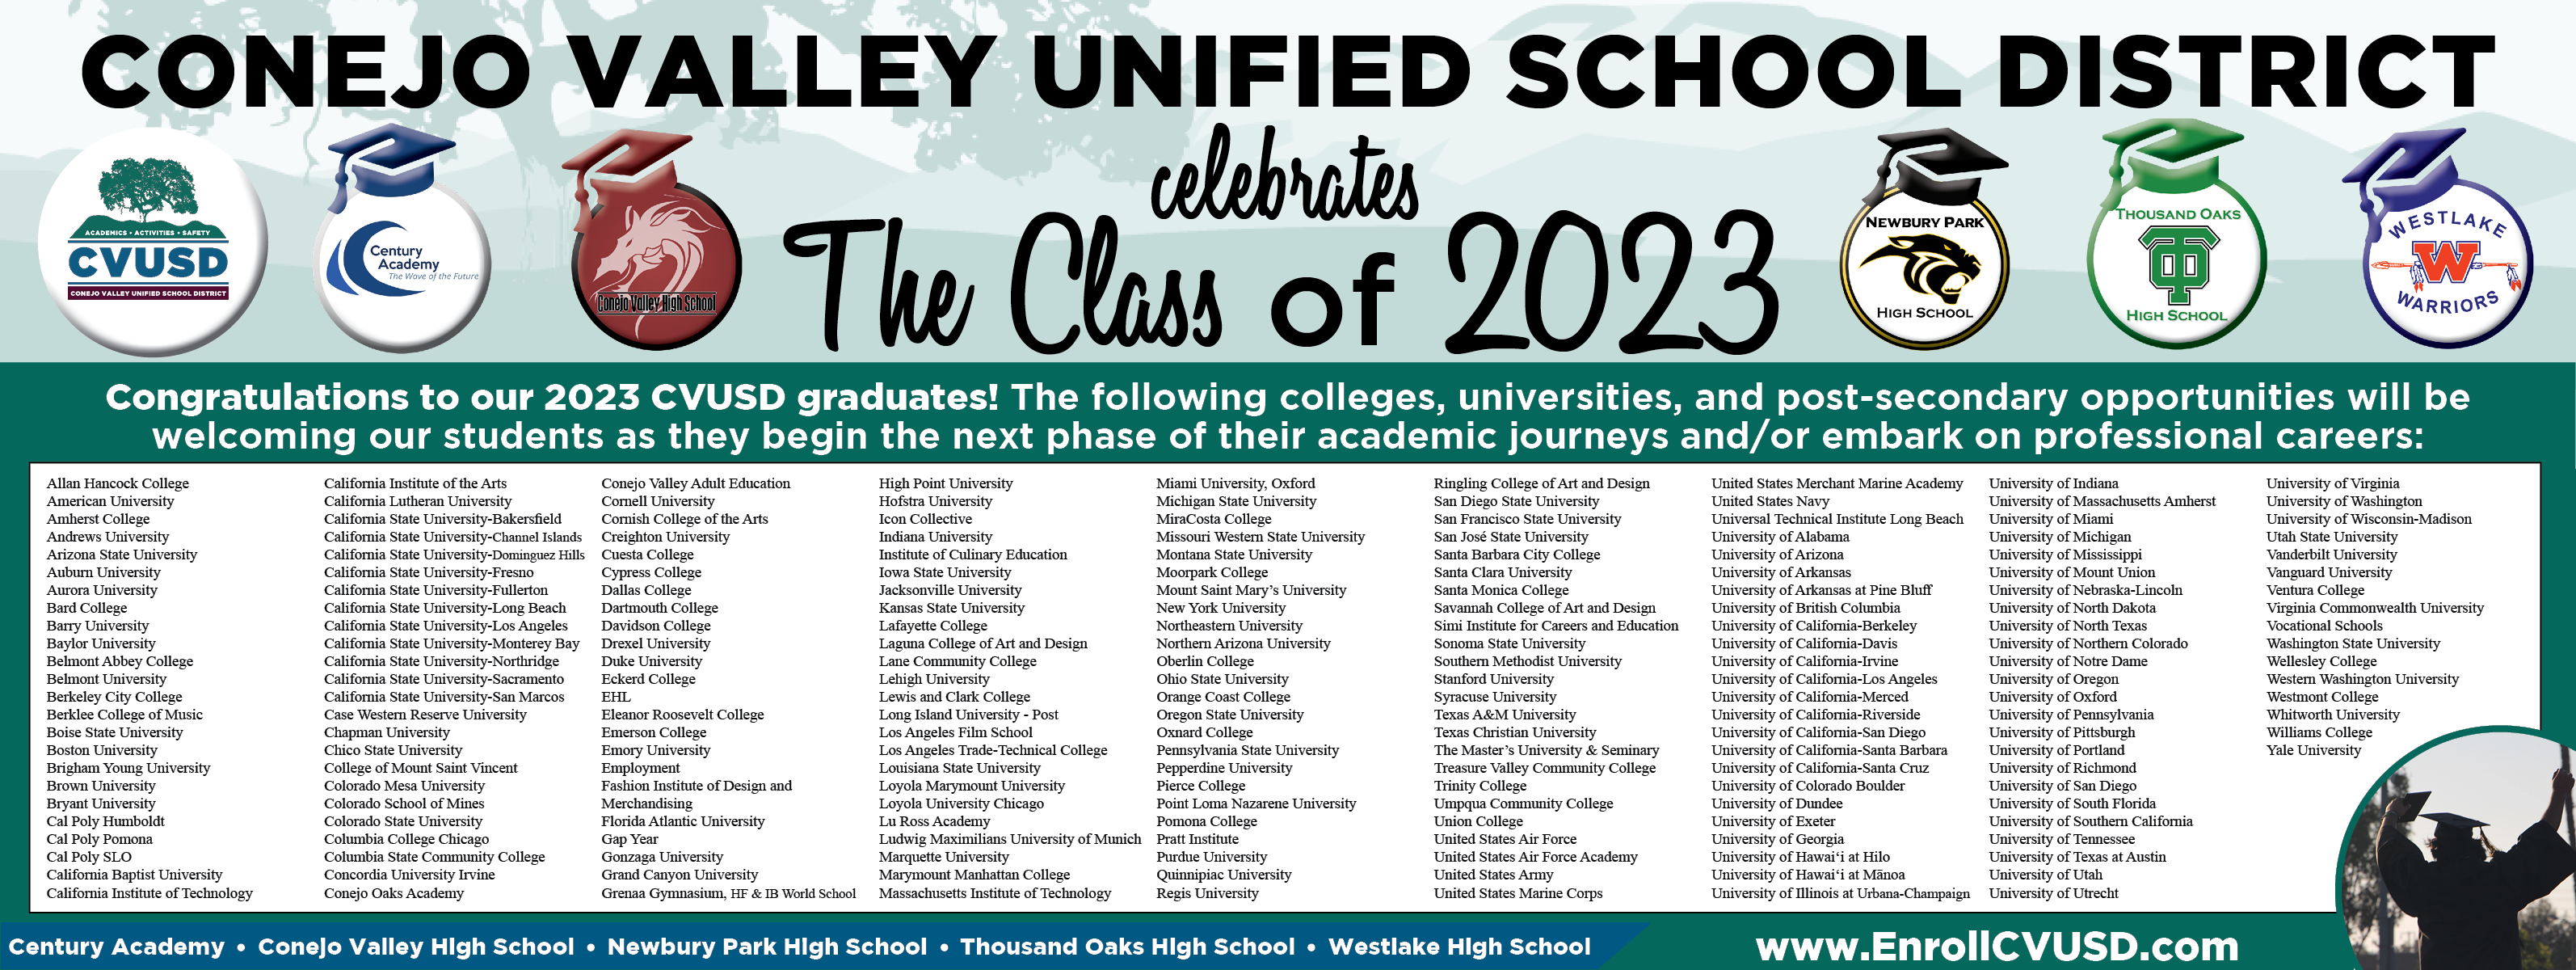 We celebrate the class of 2023